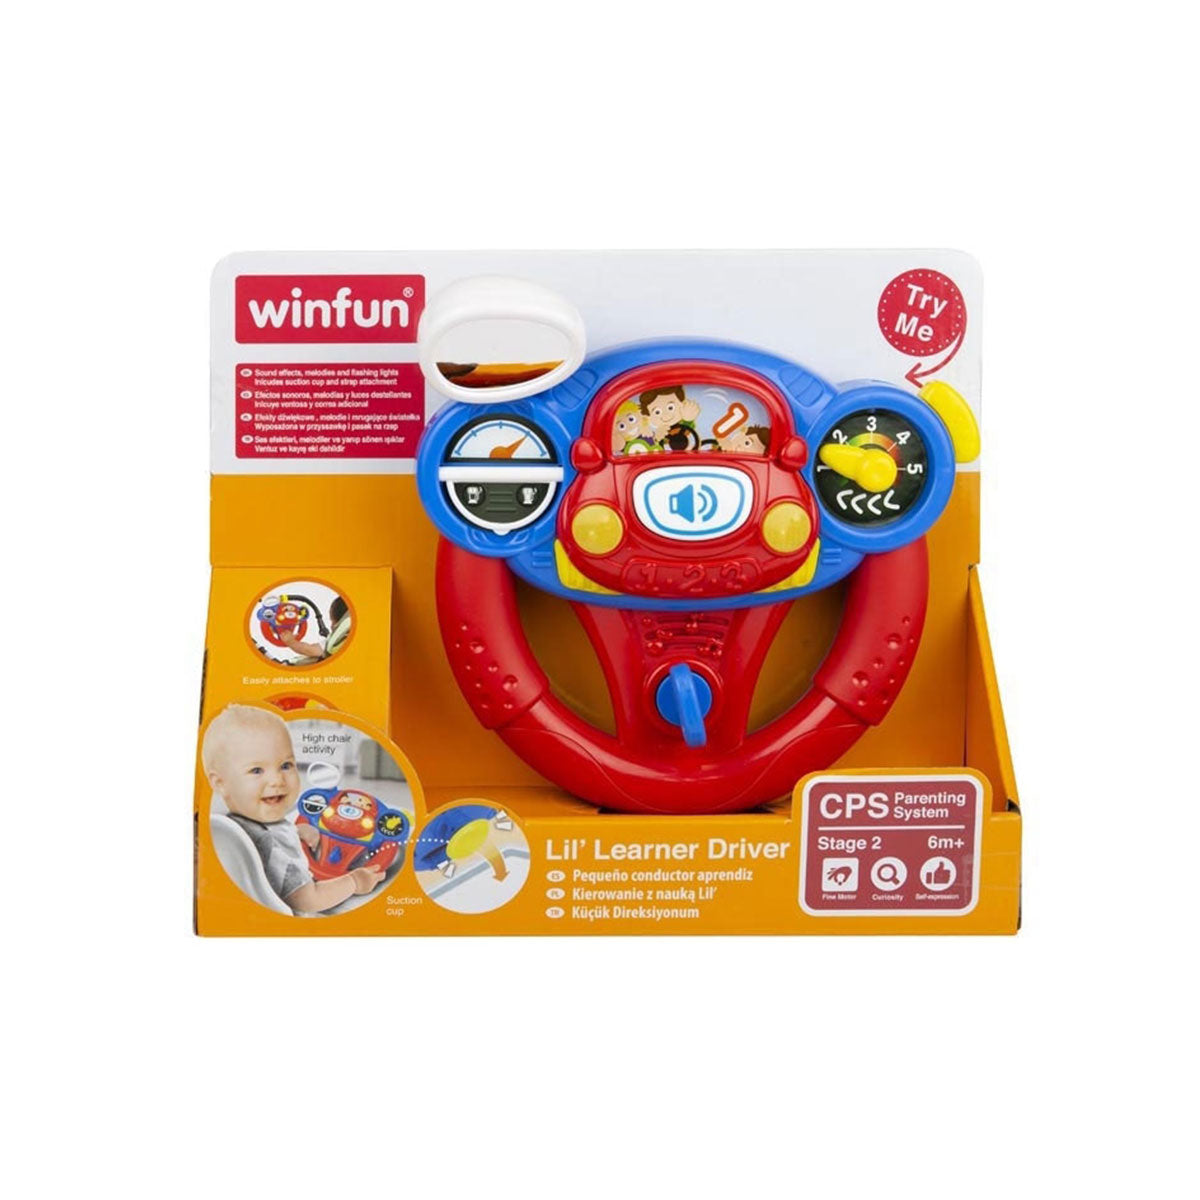 Winfun - Lil Learner Driver Toy